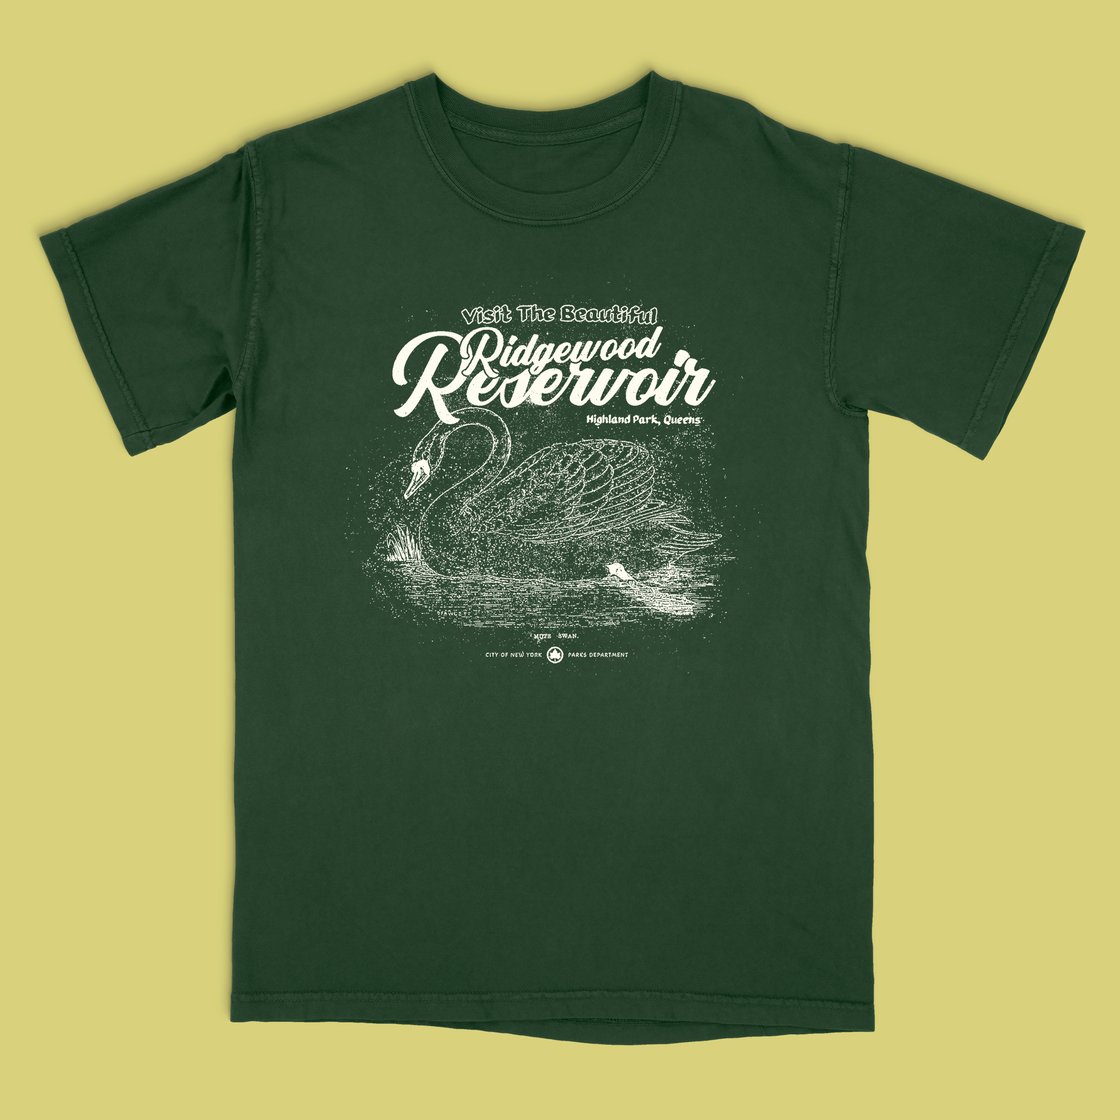 Image of Ridgewood Reservoir Queens, NY Shirt - High Quality T-Shirt Highland/Forest Park